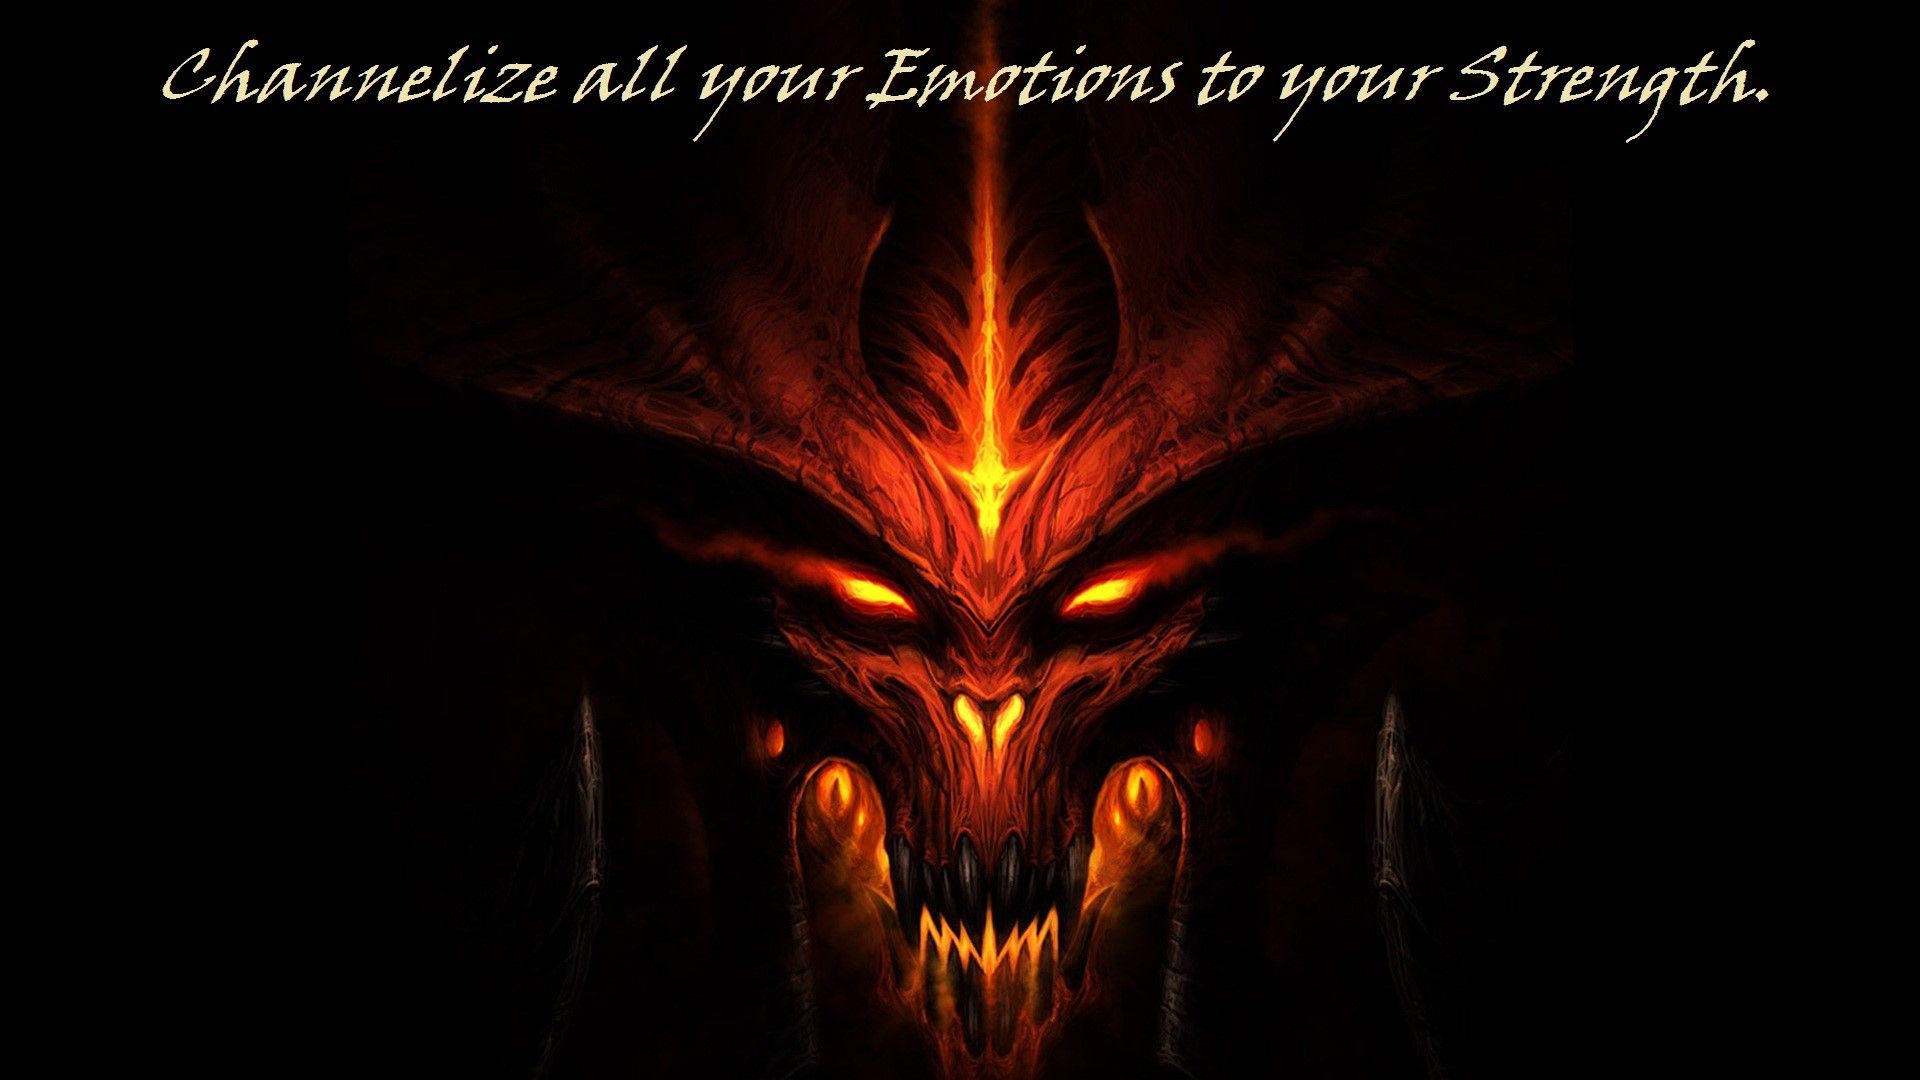 Channelize all your Emotions to your Strength.”- Quotes on ...